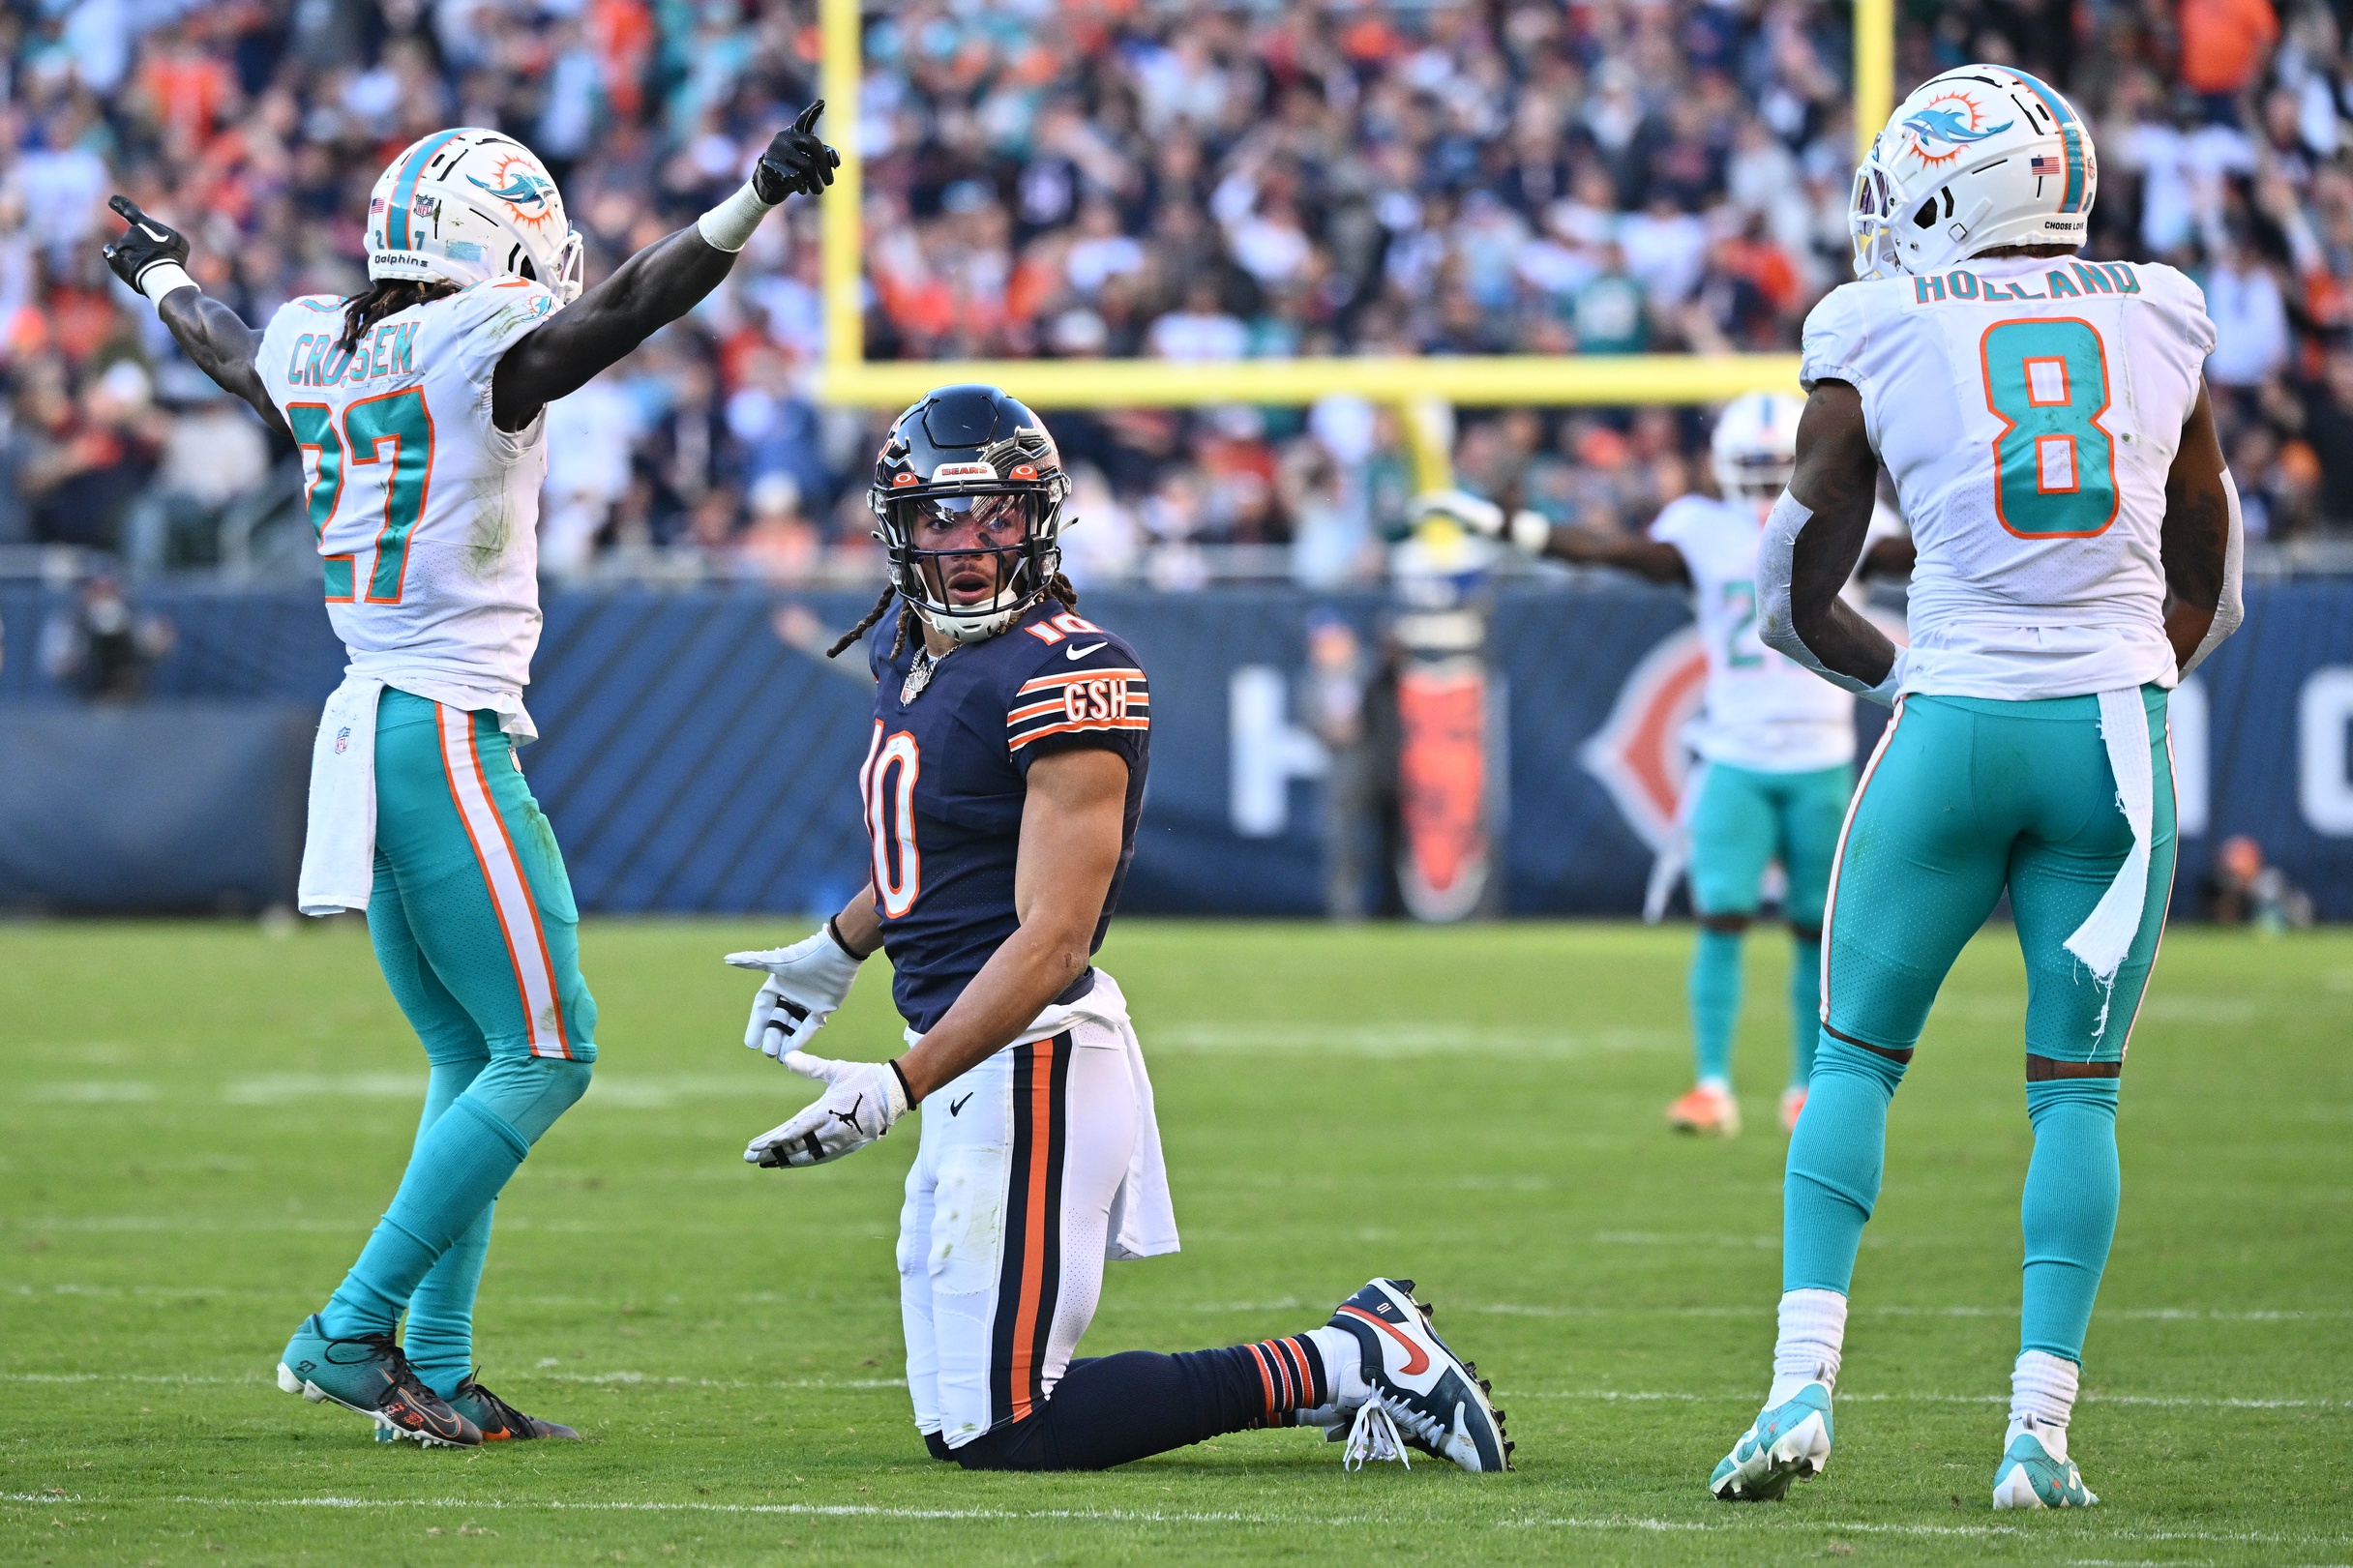 Chase Claypool (10) looks for a call from the referee after Miami Dolphins defensive back Keion Crossen (27) and safety Jevon Holland (8) break up a pass in the fourth quarter at Soldier Field.